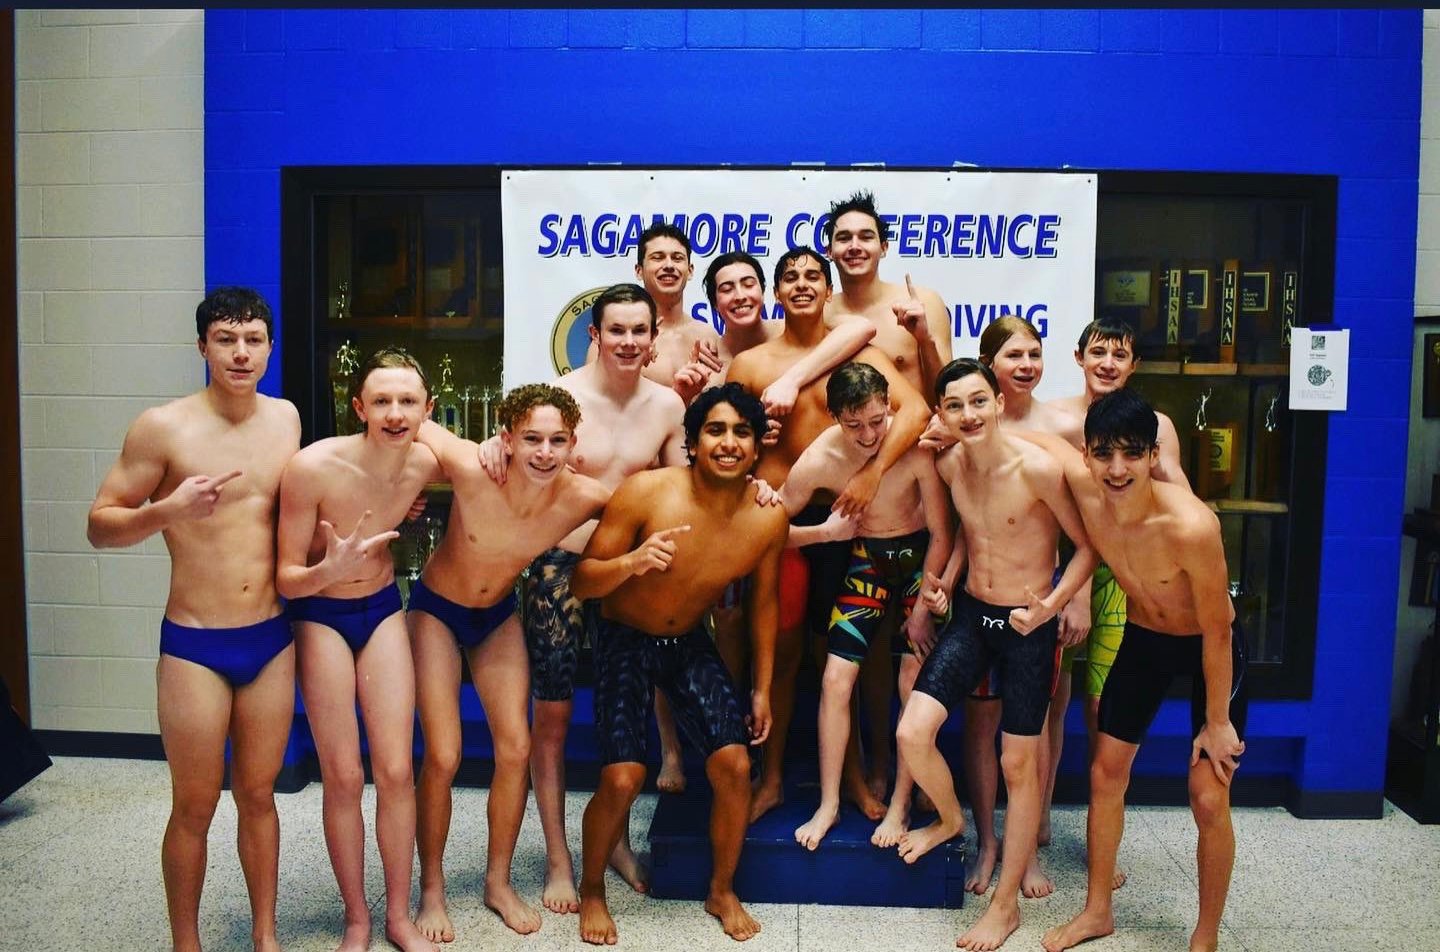 The Crawfordsville boys swim team is back on top of the Sagamore Conference, winning 10 of the 12 events and totaling 490 points.